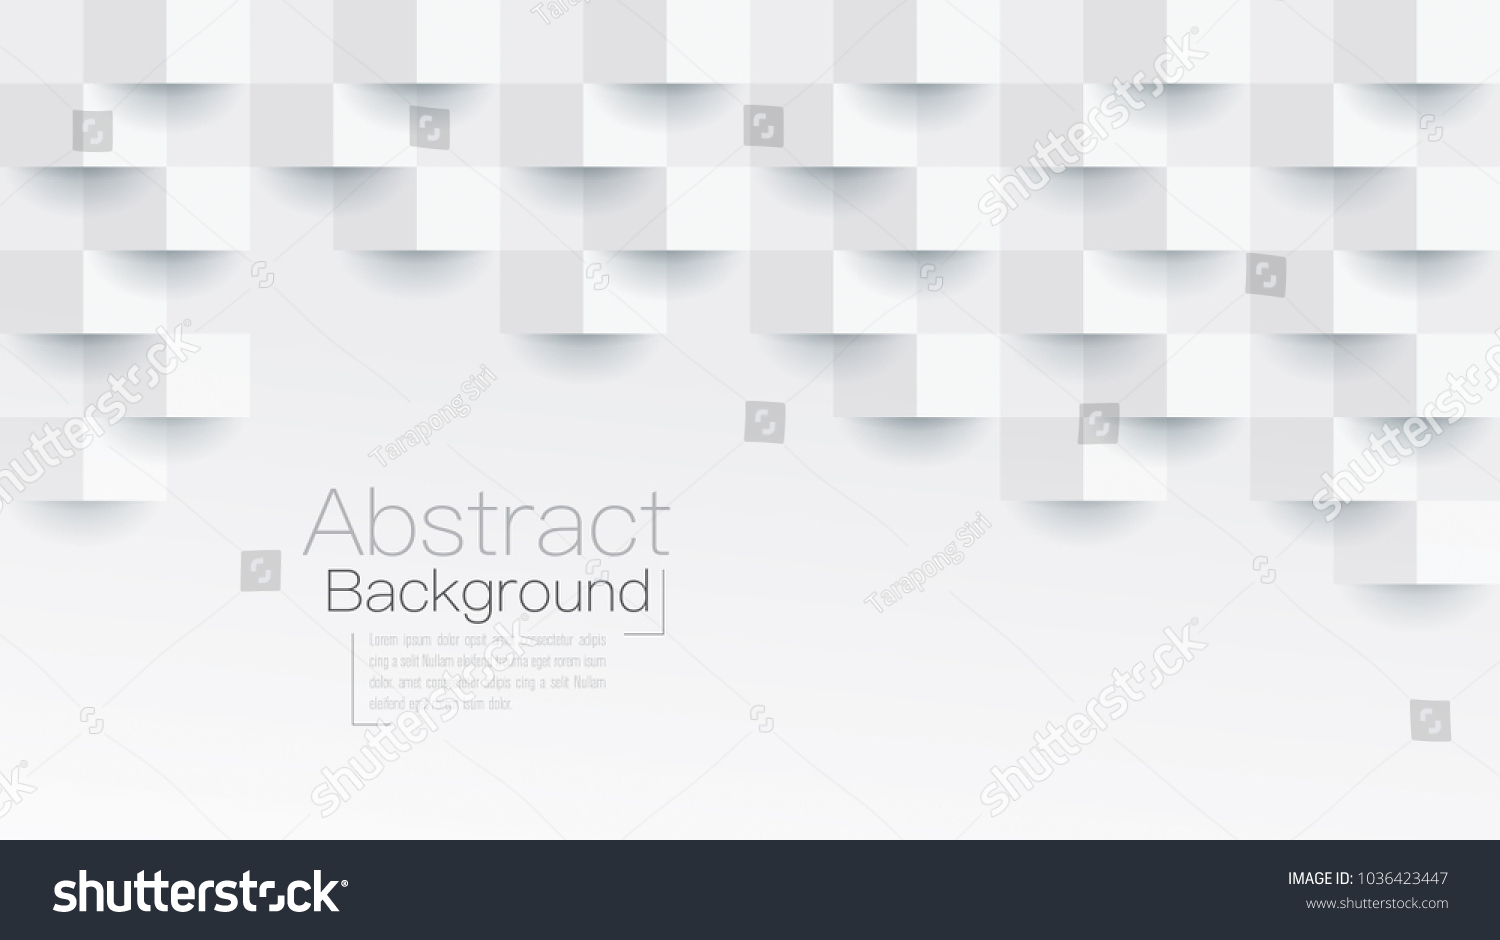 White abstract texture. Vector background 3d paper art style can be used in cover design, book design, poster, flyer, cd cover, website backgrounds or advertising. #1036423447